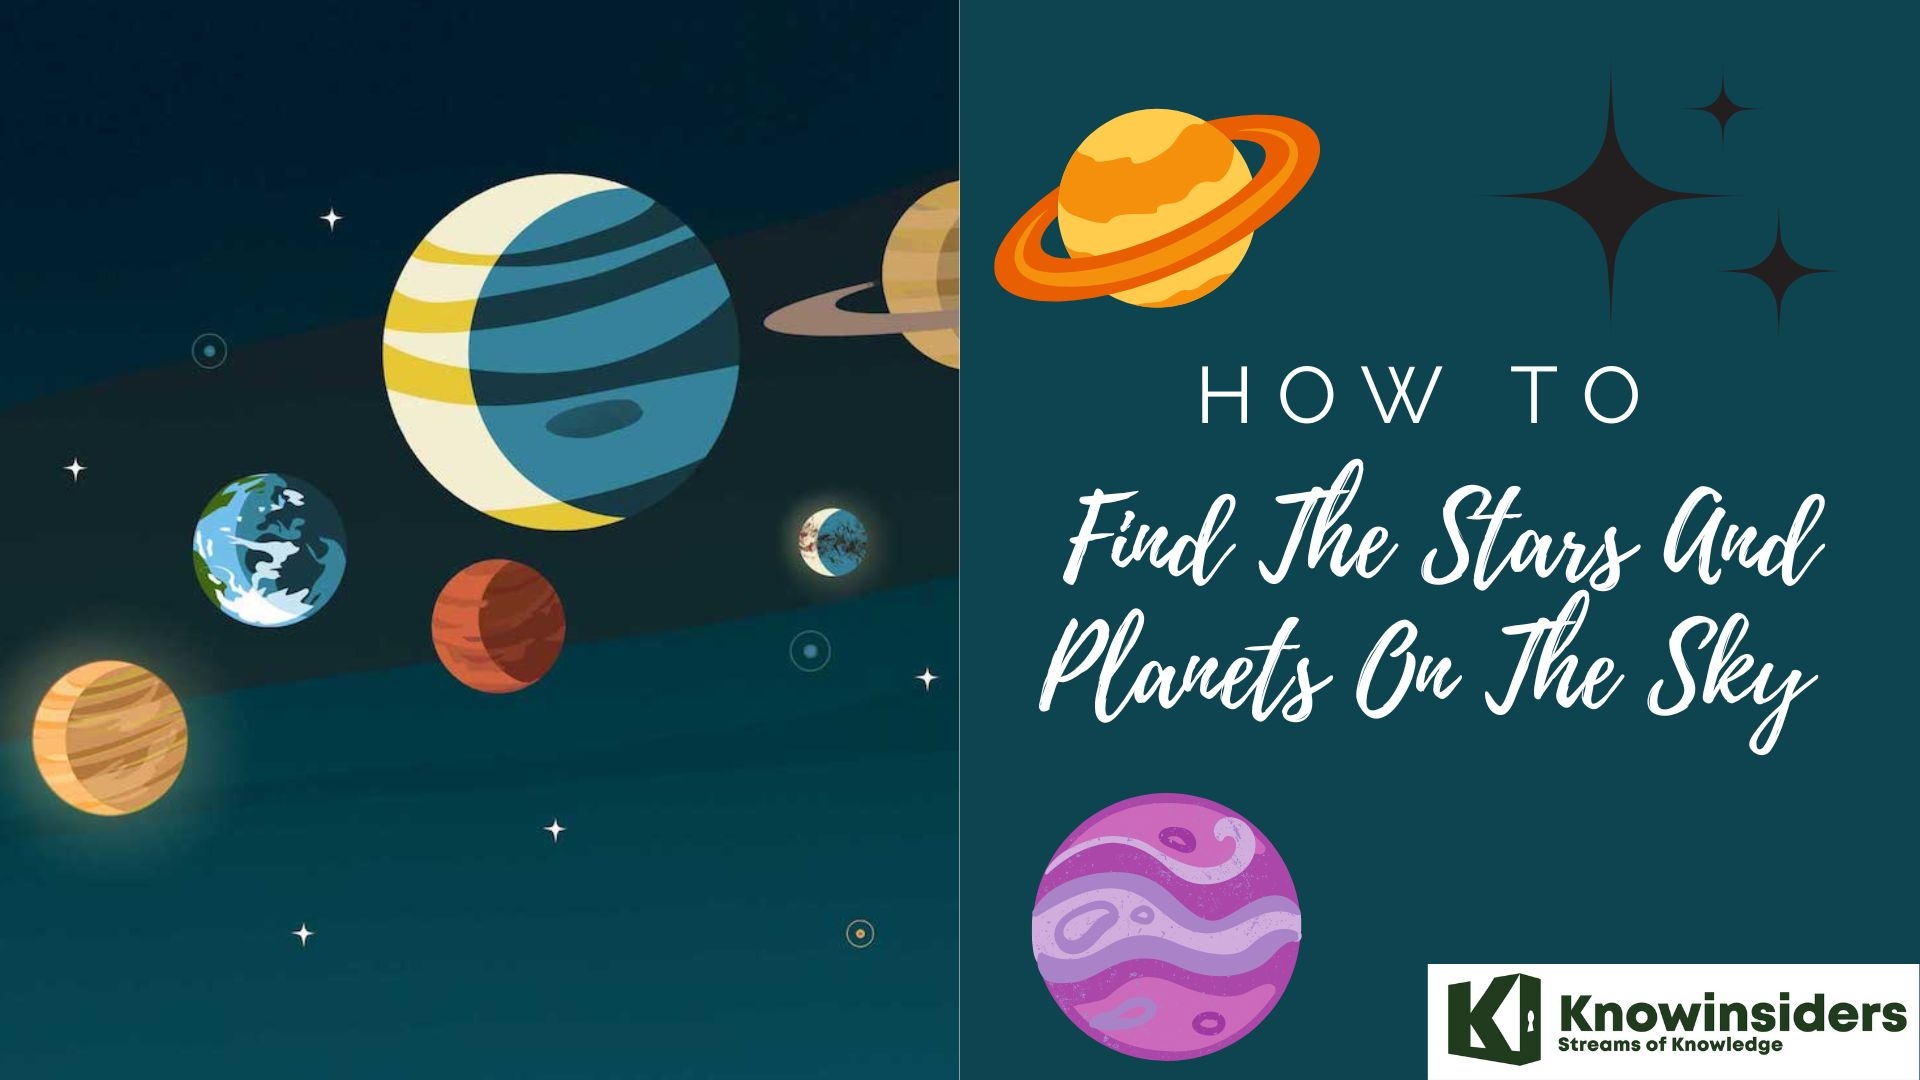 How To Find The Stars And Planets On The Sky  Knowinsiders.com